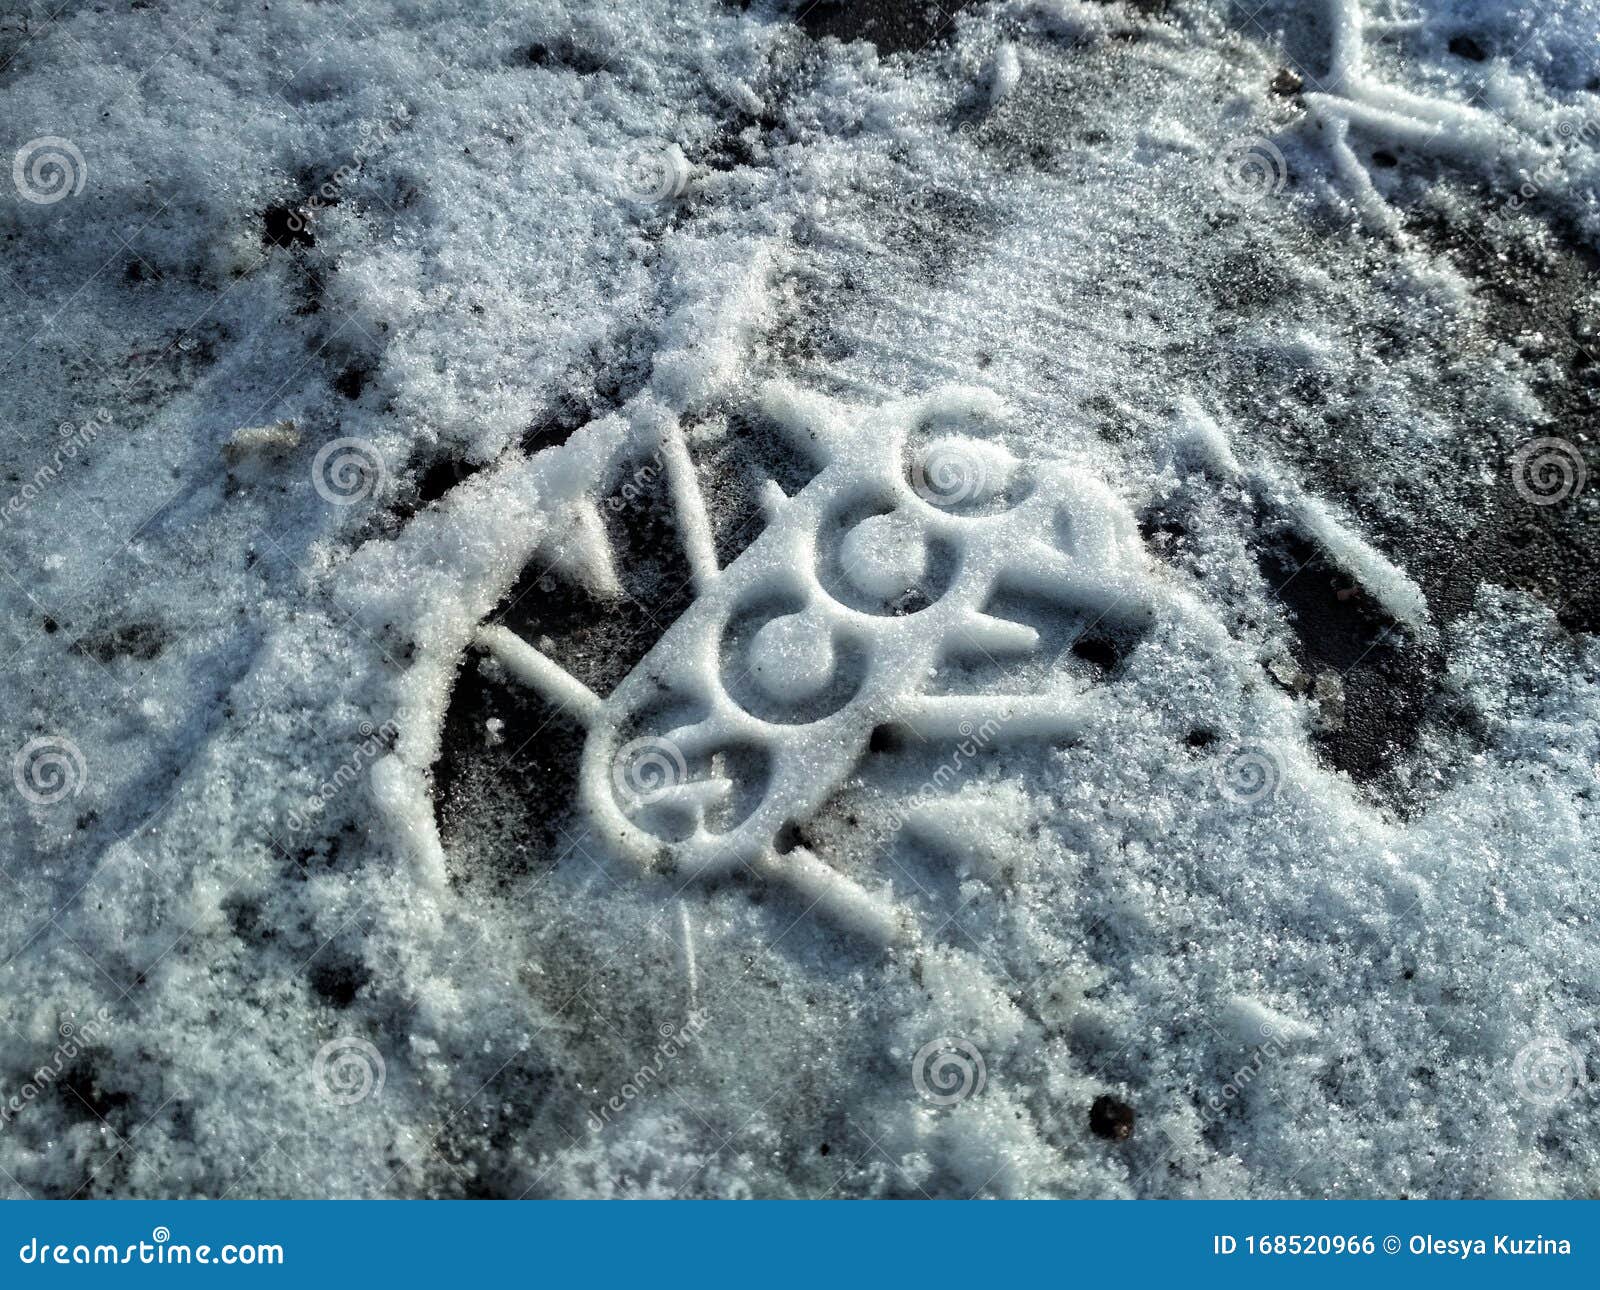 KIEV, UKRAINE - January 07, 2019: Imprint of ECCO Shoes on the Snow. One  Clearly Defined Footprint of Shoes or Boots in the Snow. Stock Photo -  Image of closeup, outdoor: 168520966